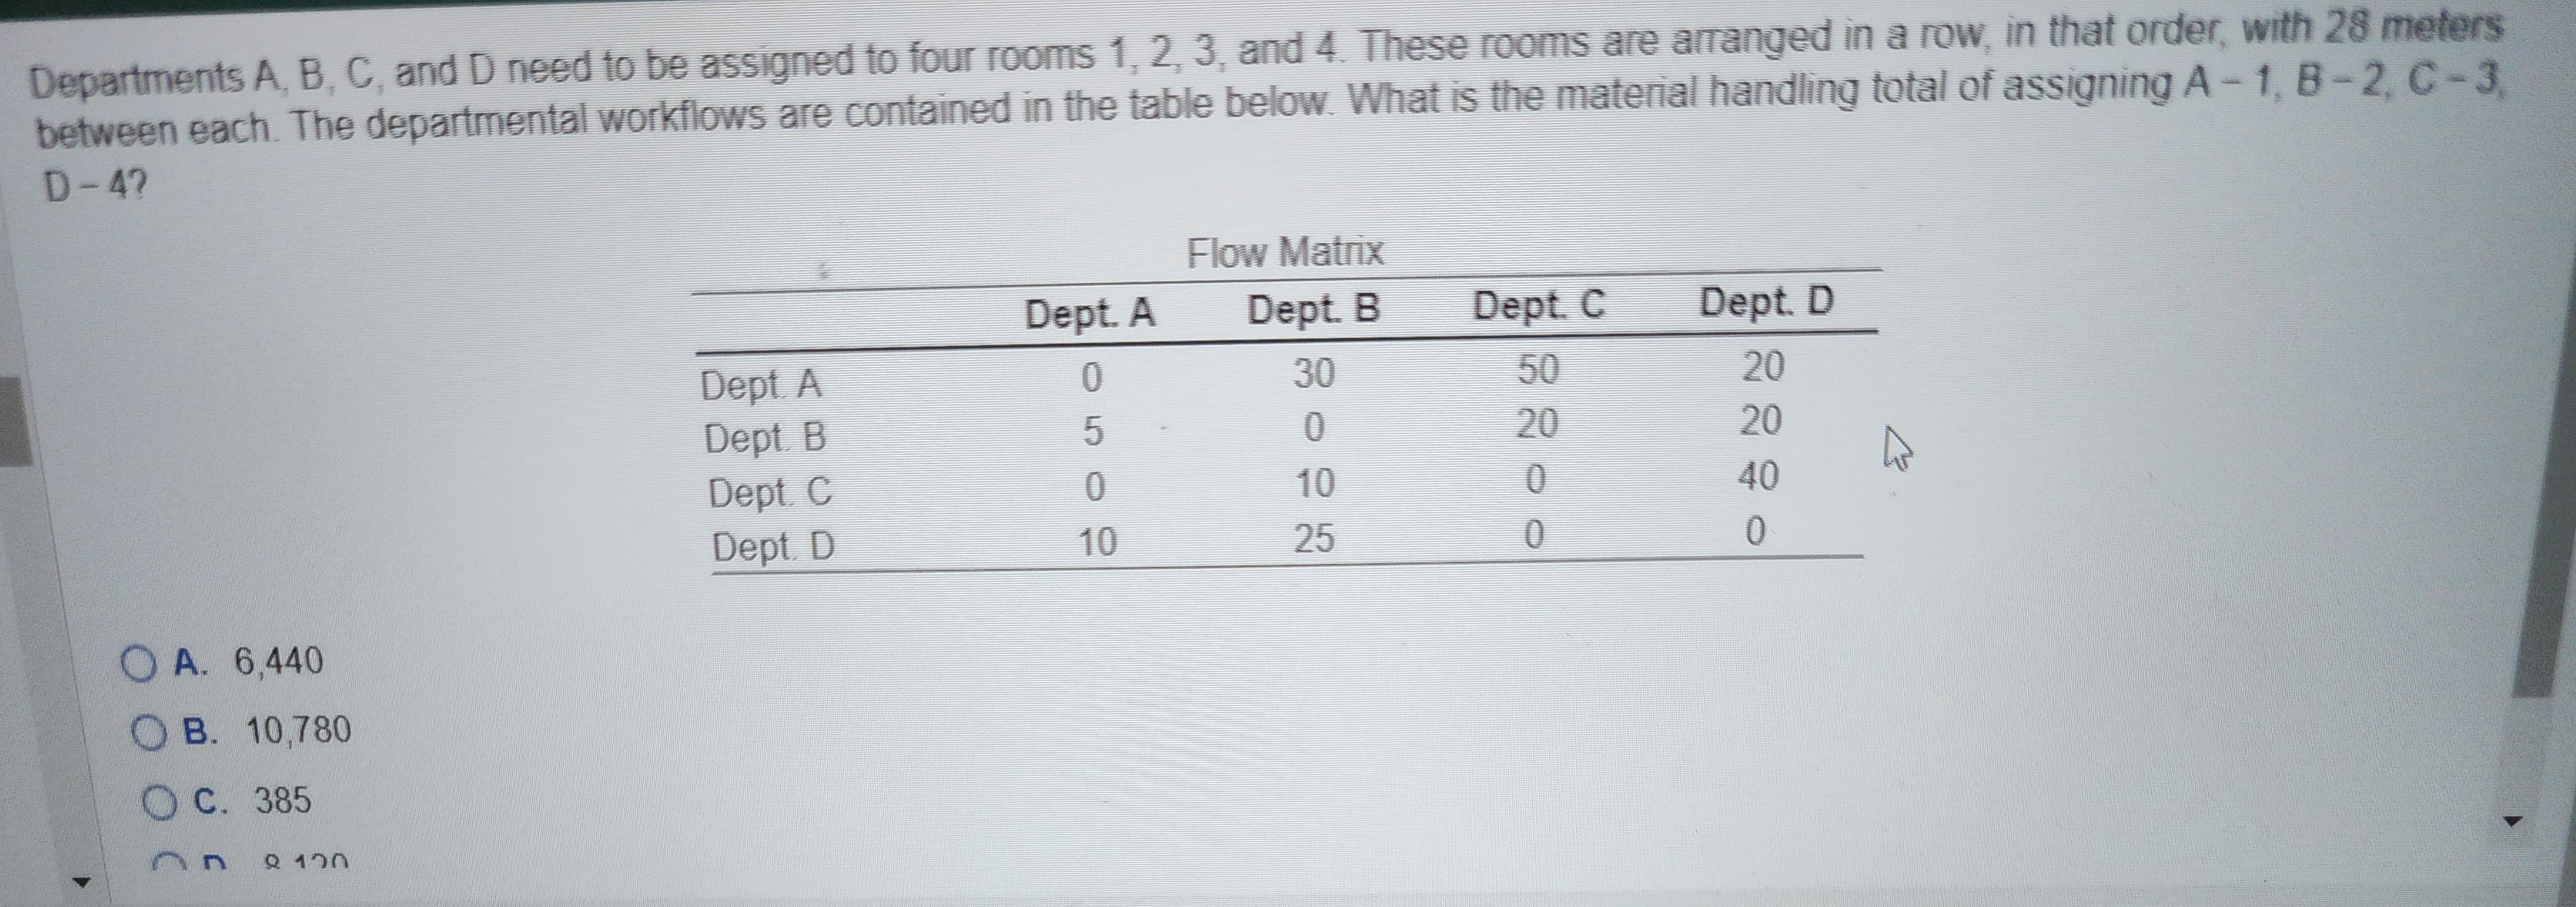 Departments A, B, C, and D need to be assigned to four rooms 1, 2, 3, and 4. These rooms are arranged in a row, in that order, with 28 meters
between each. The departmental workflows are contained in the table below. What is the material handling total of assigning A-1, B-2, C-3
D-4?
OA. 6,440
B. 10,780
OC. 385
Q 120
Dept. A
Dept. B
Dept. C
Dept. D
Dept. A
0
5
0
10
Flow Matrix
Dept. B
30
0
10
25
Dept. C
20
0
0
Dept. D
20
20
40
0